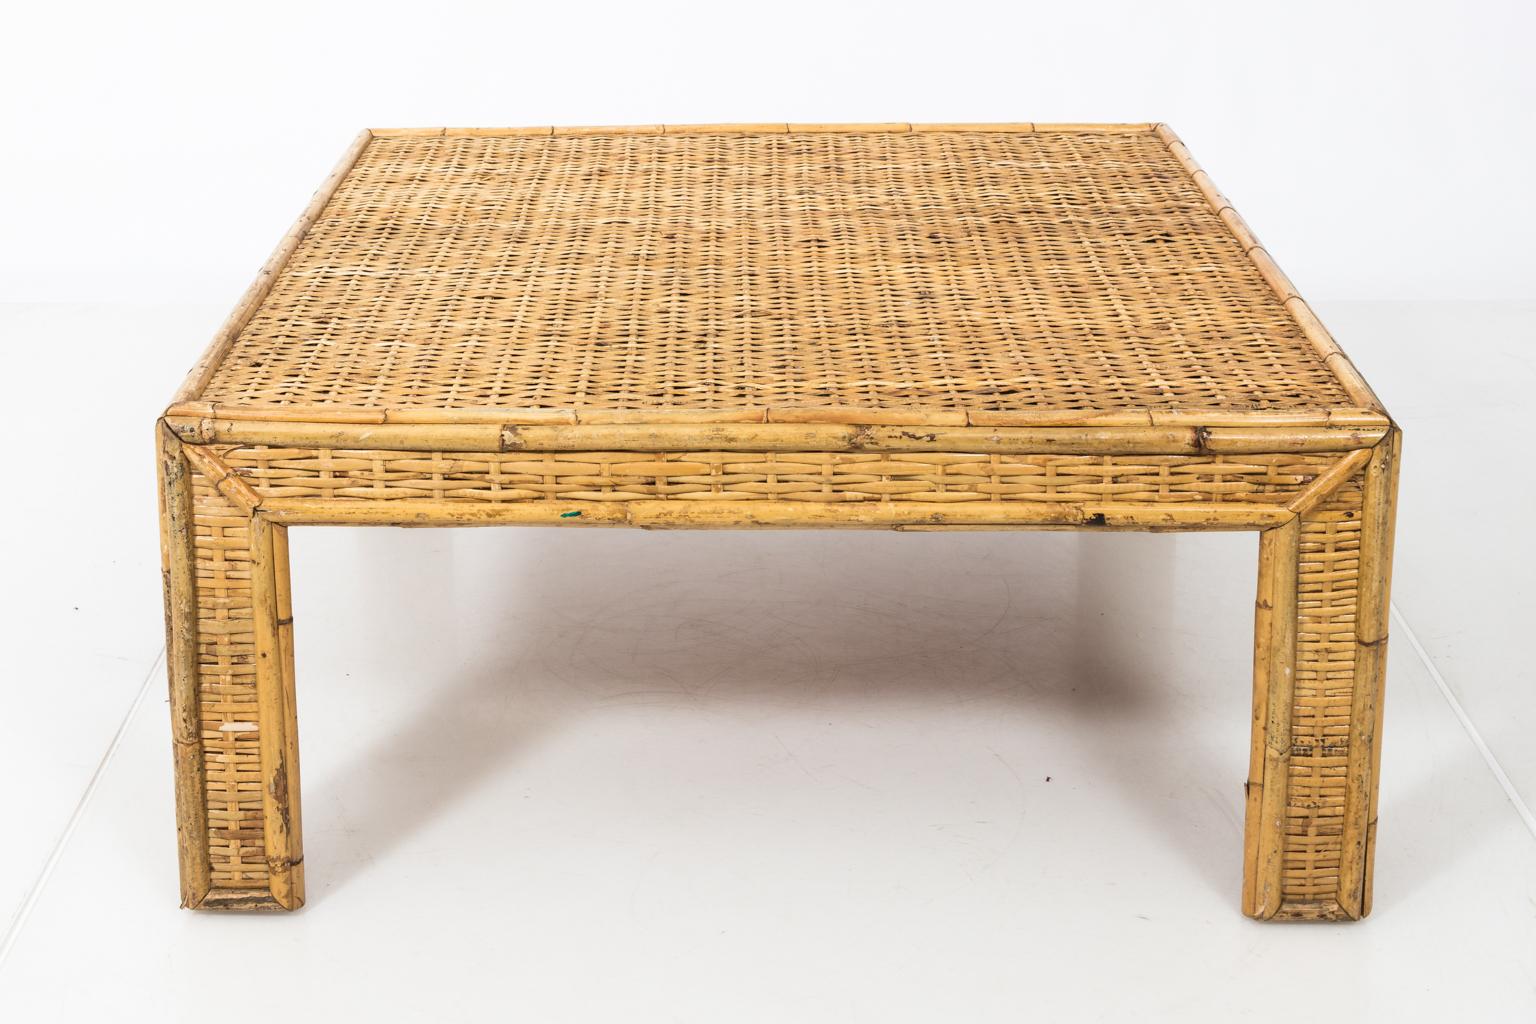 Hollywood Regency Square Woven Rattan Mid-Century Modern Coffee Table